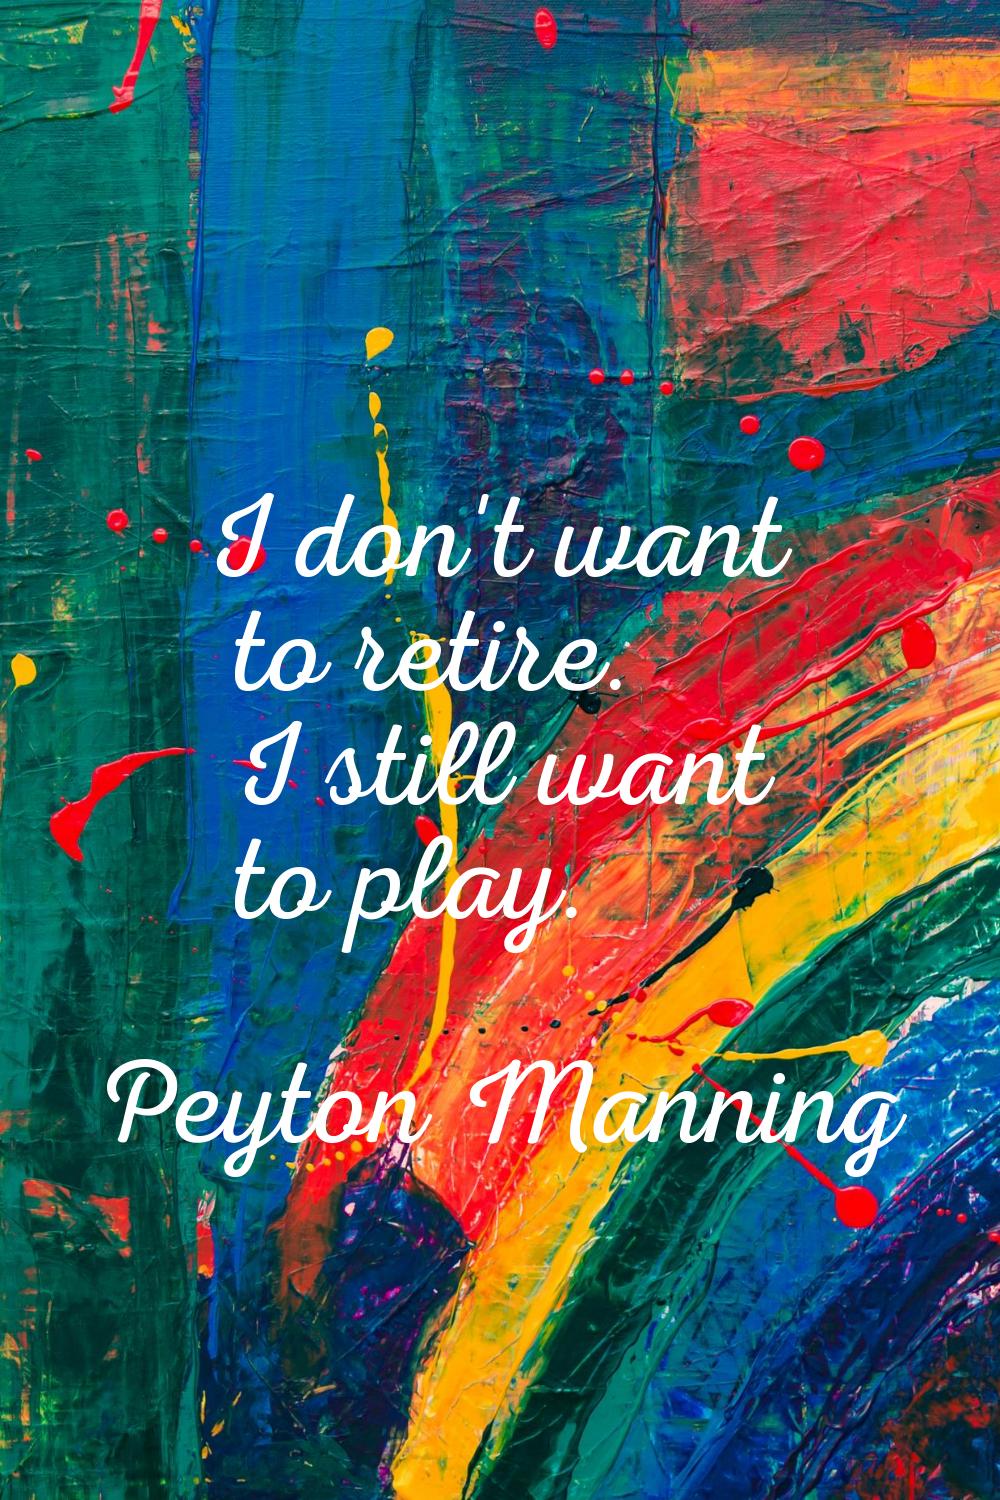 I don't want to retire. I still want to play.